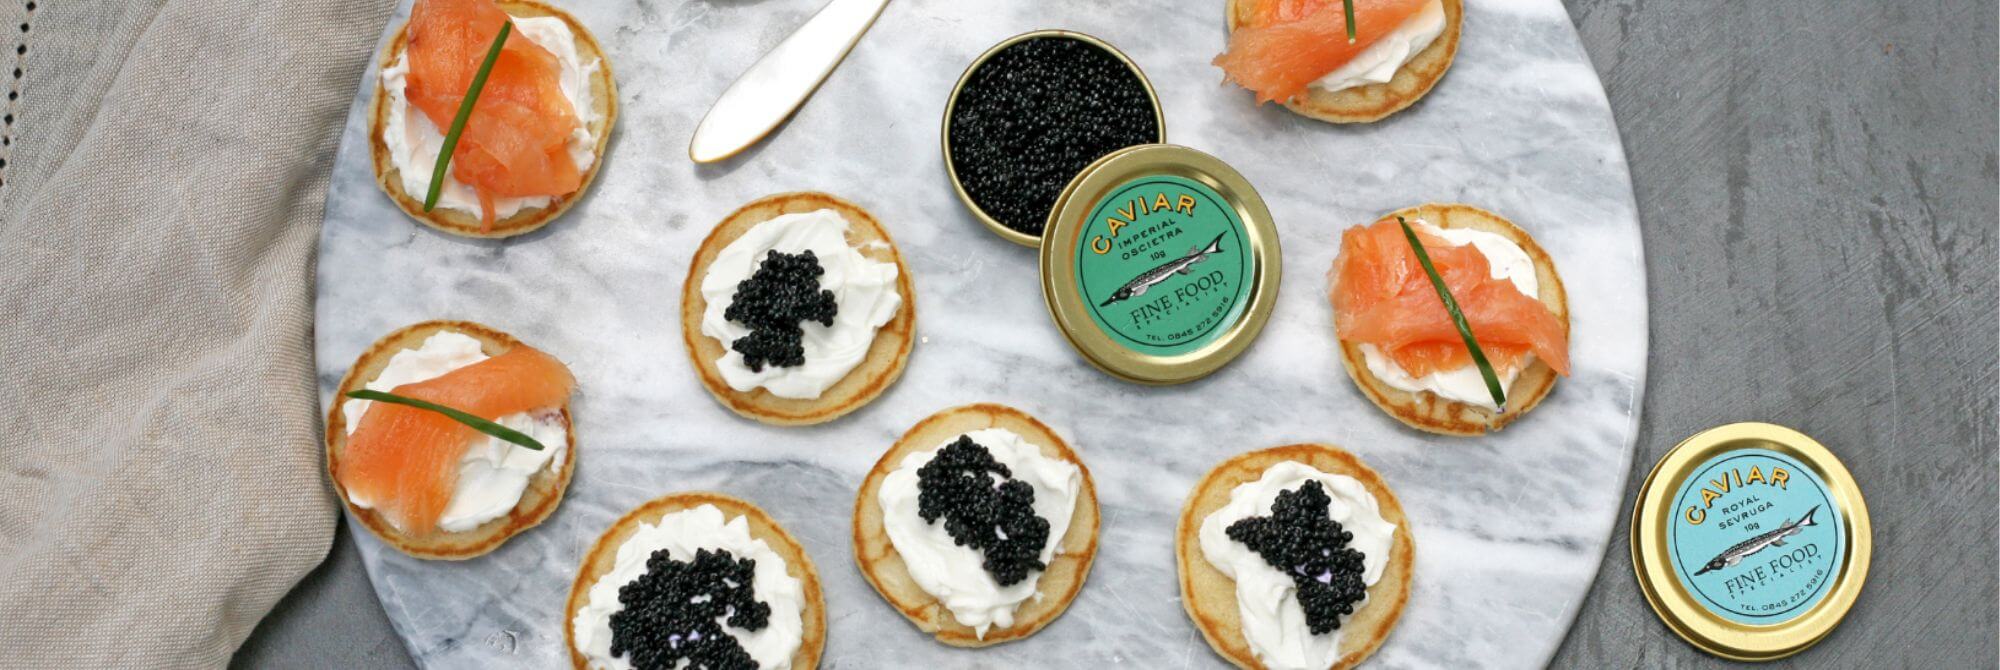 Caviar Gifts & Hampers